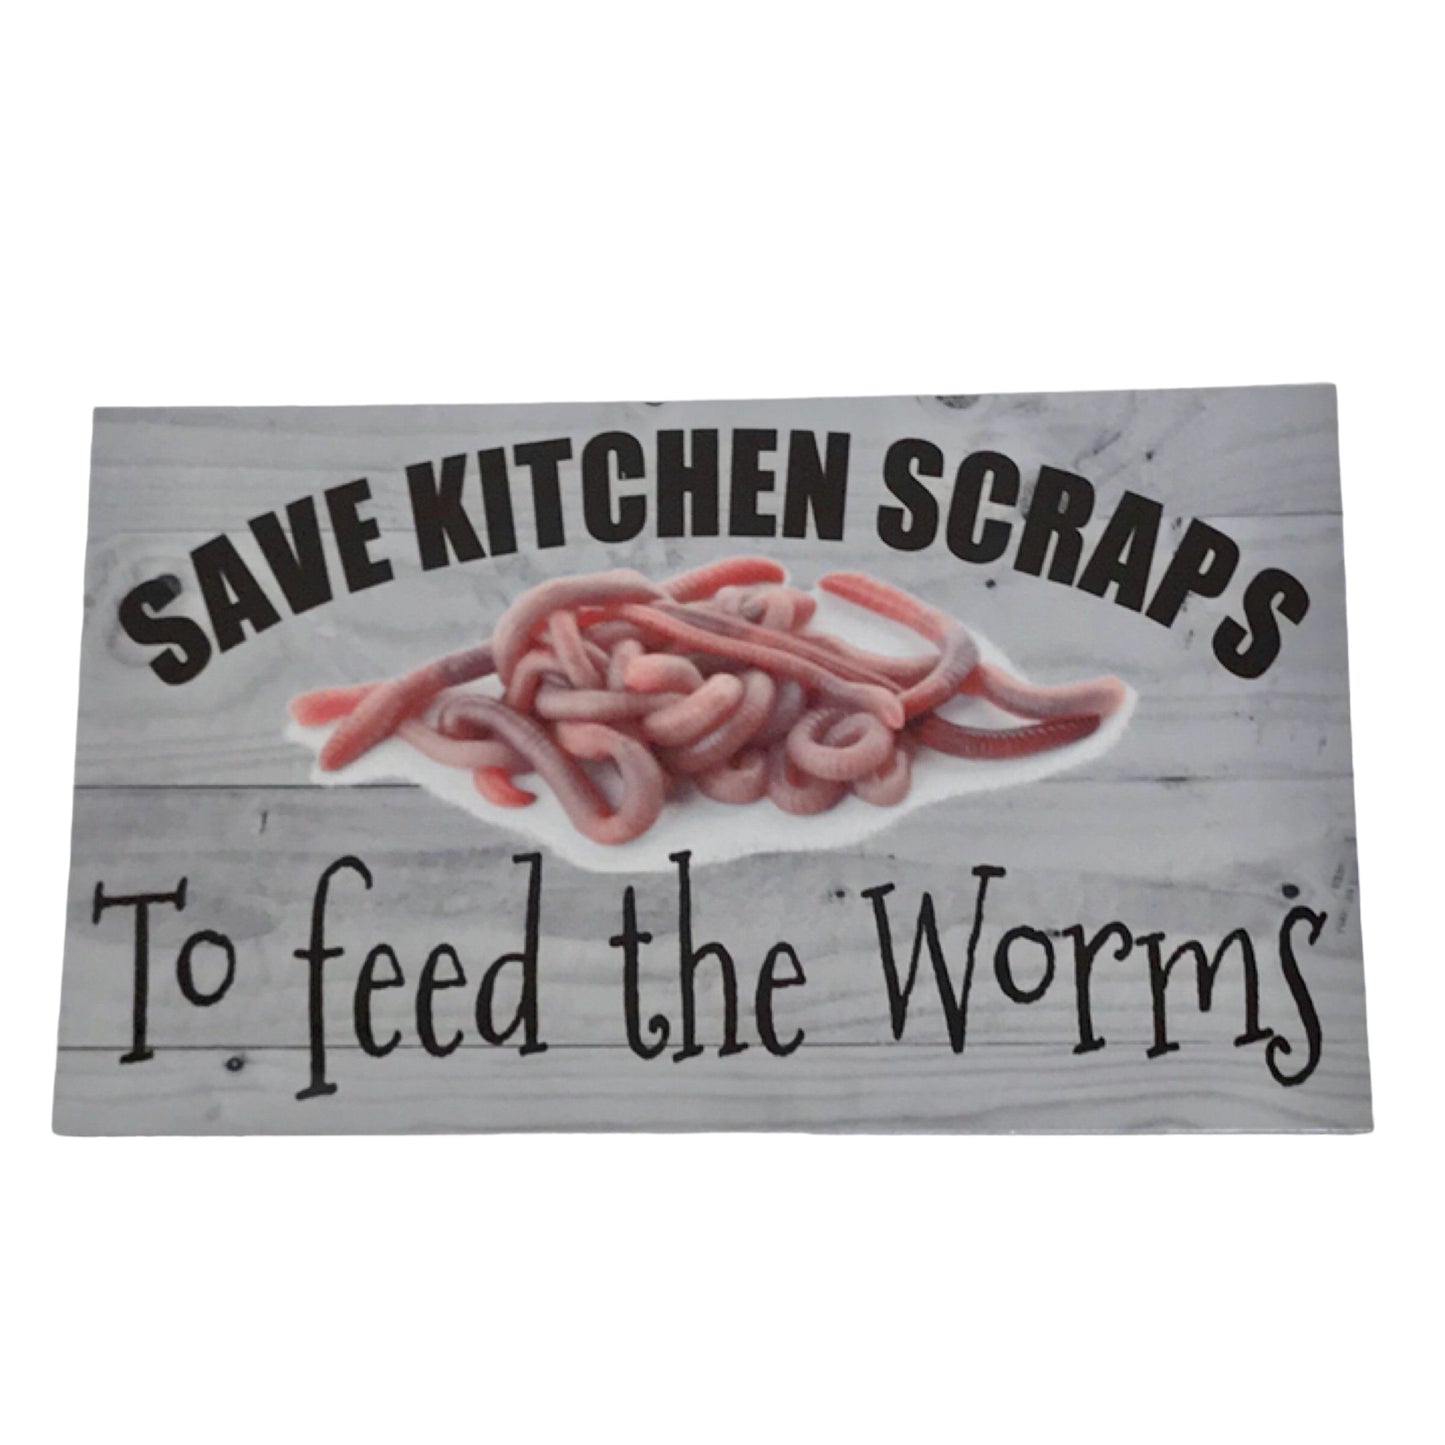 Save Kitchen Scraps To Feed The Worms Sign